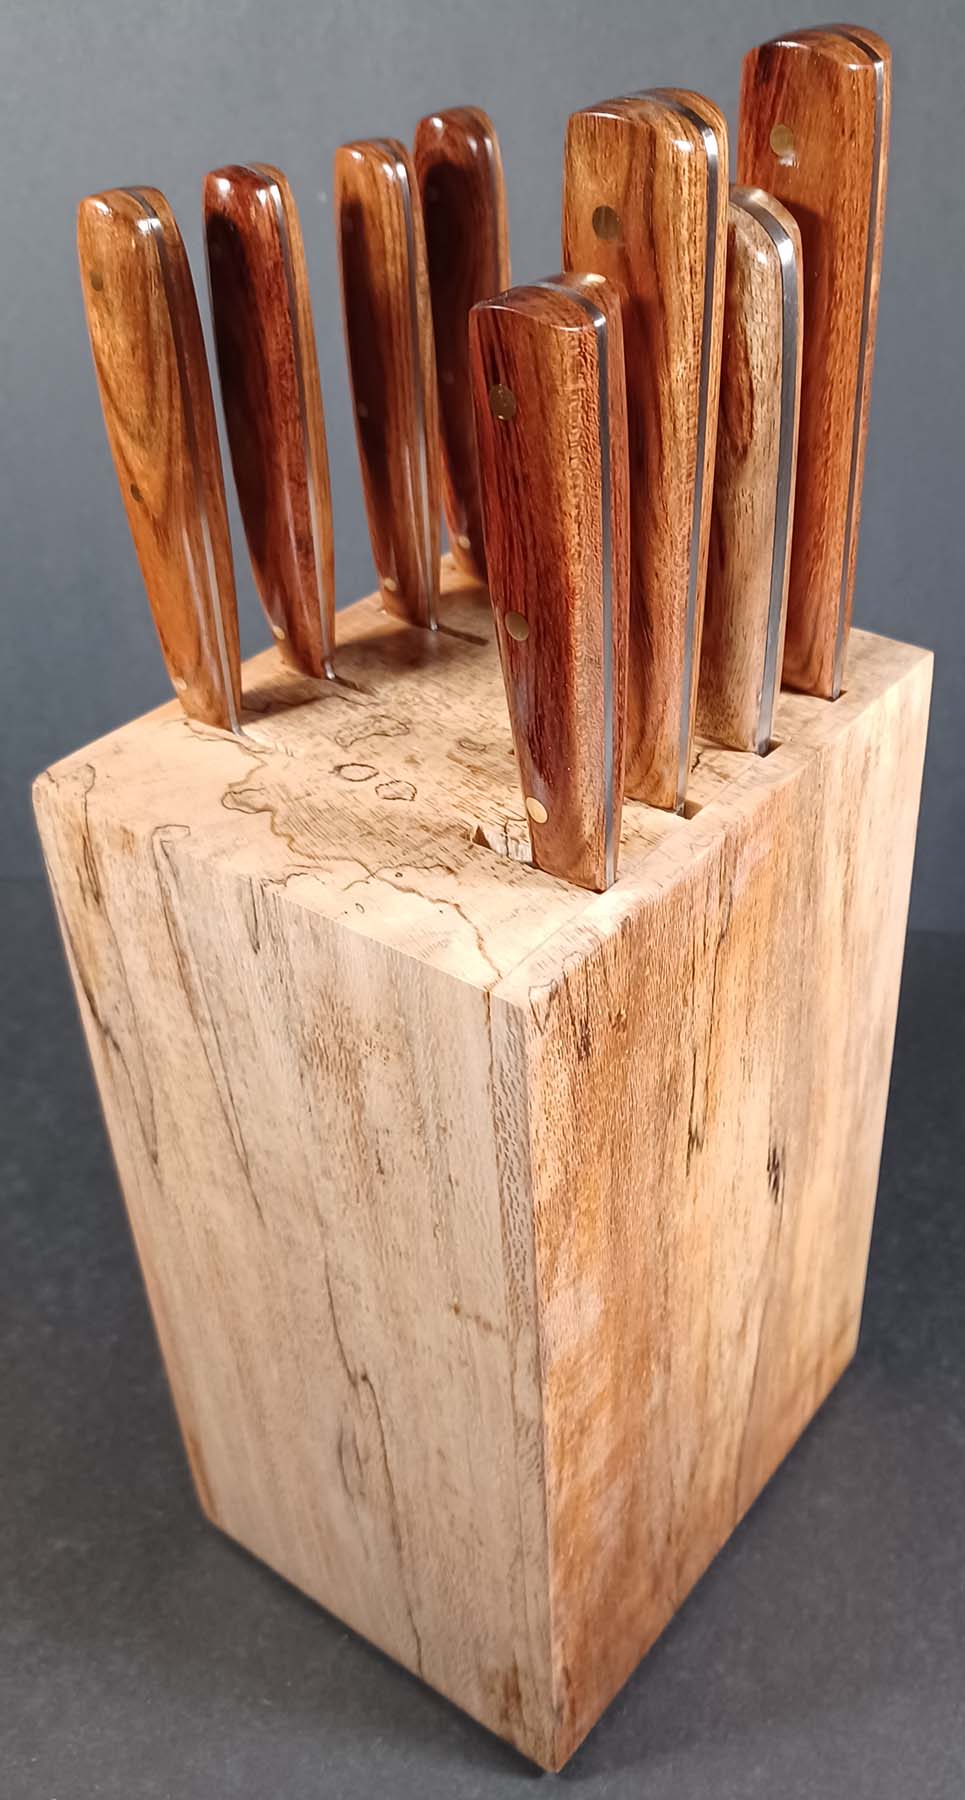 Knife Block in Spalted Sycamore with Knives in Chechen